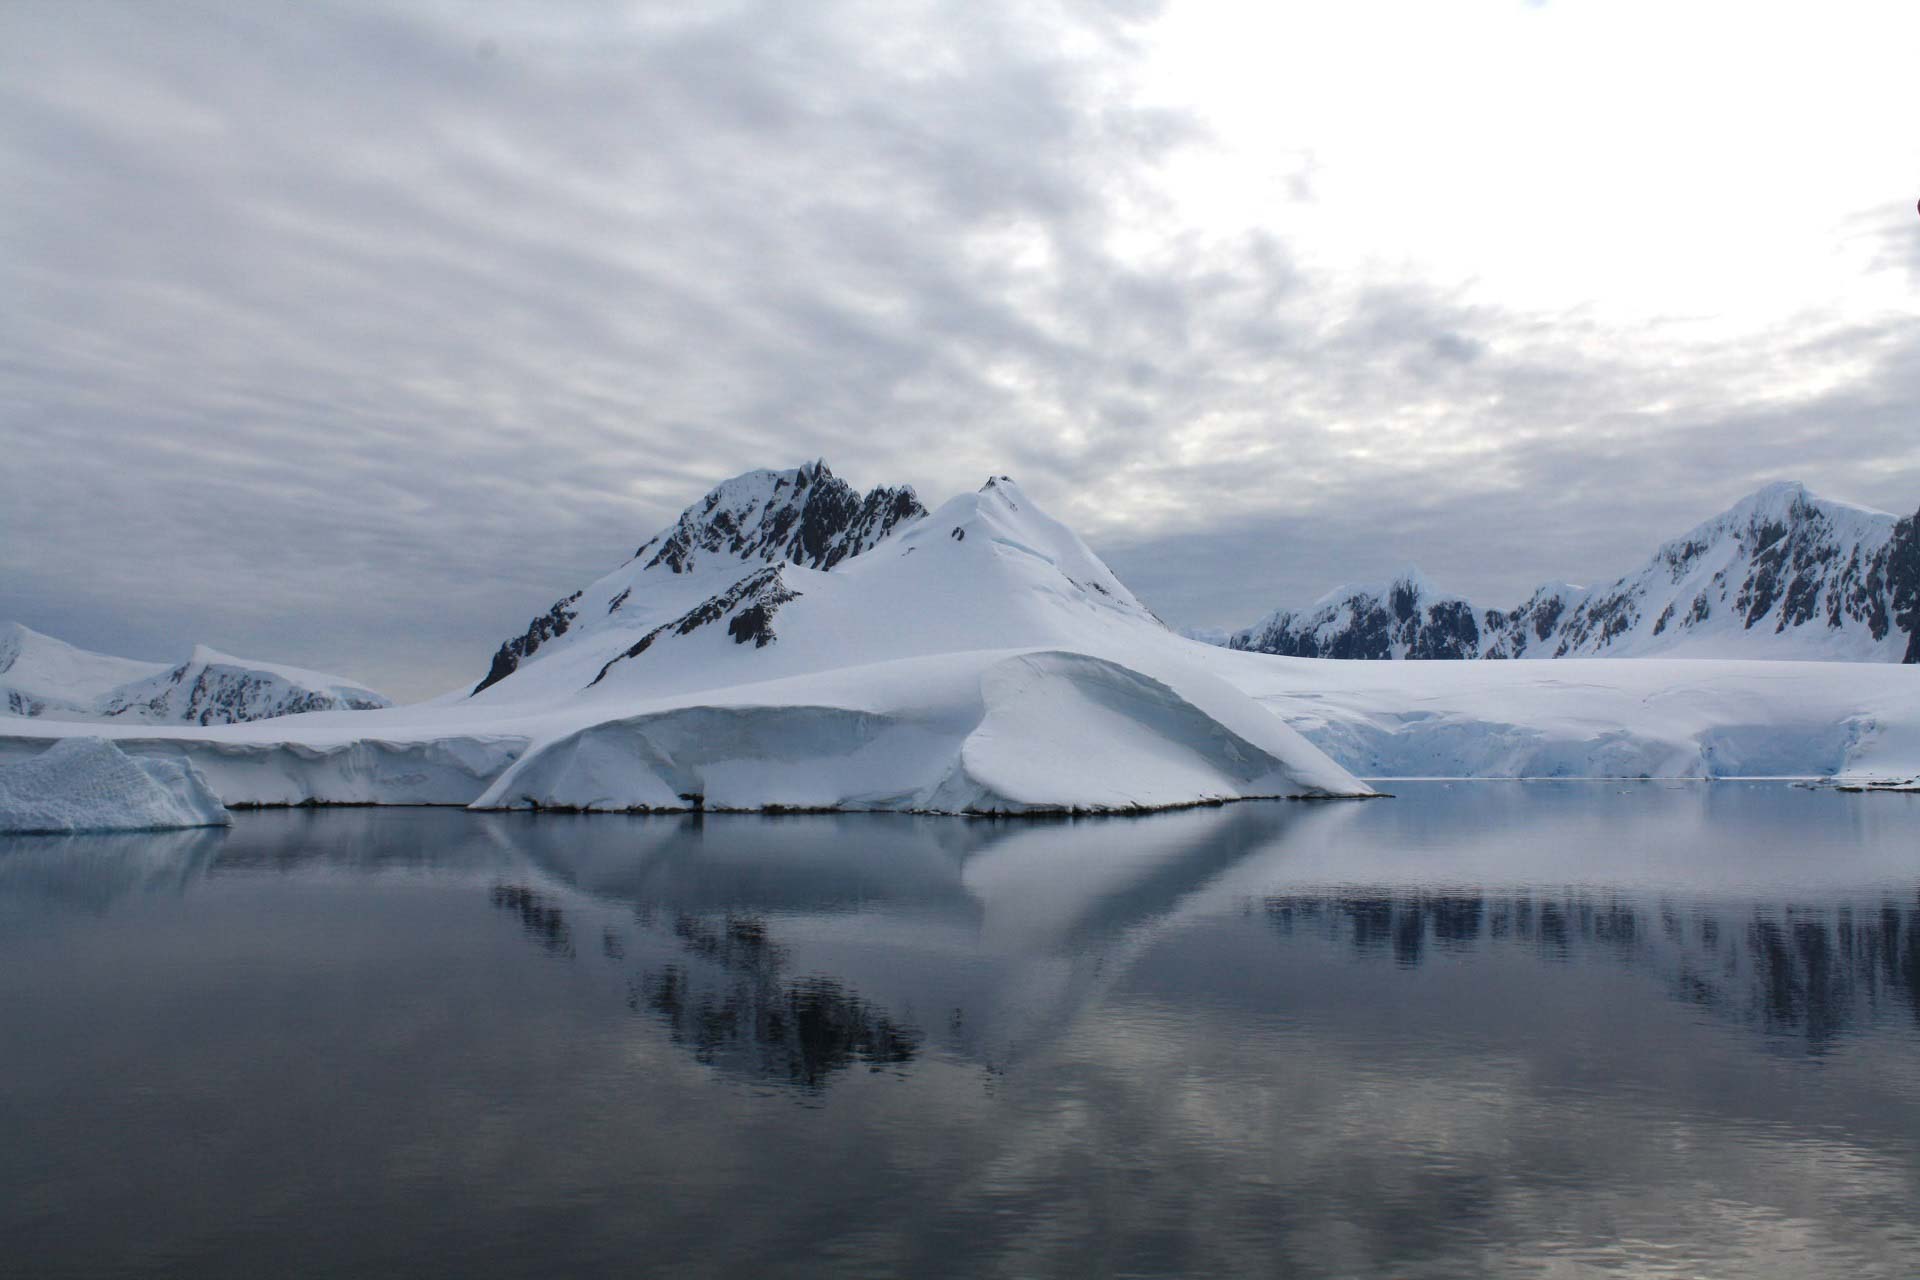 Incredible views of the Antarctic region landscape